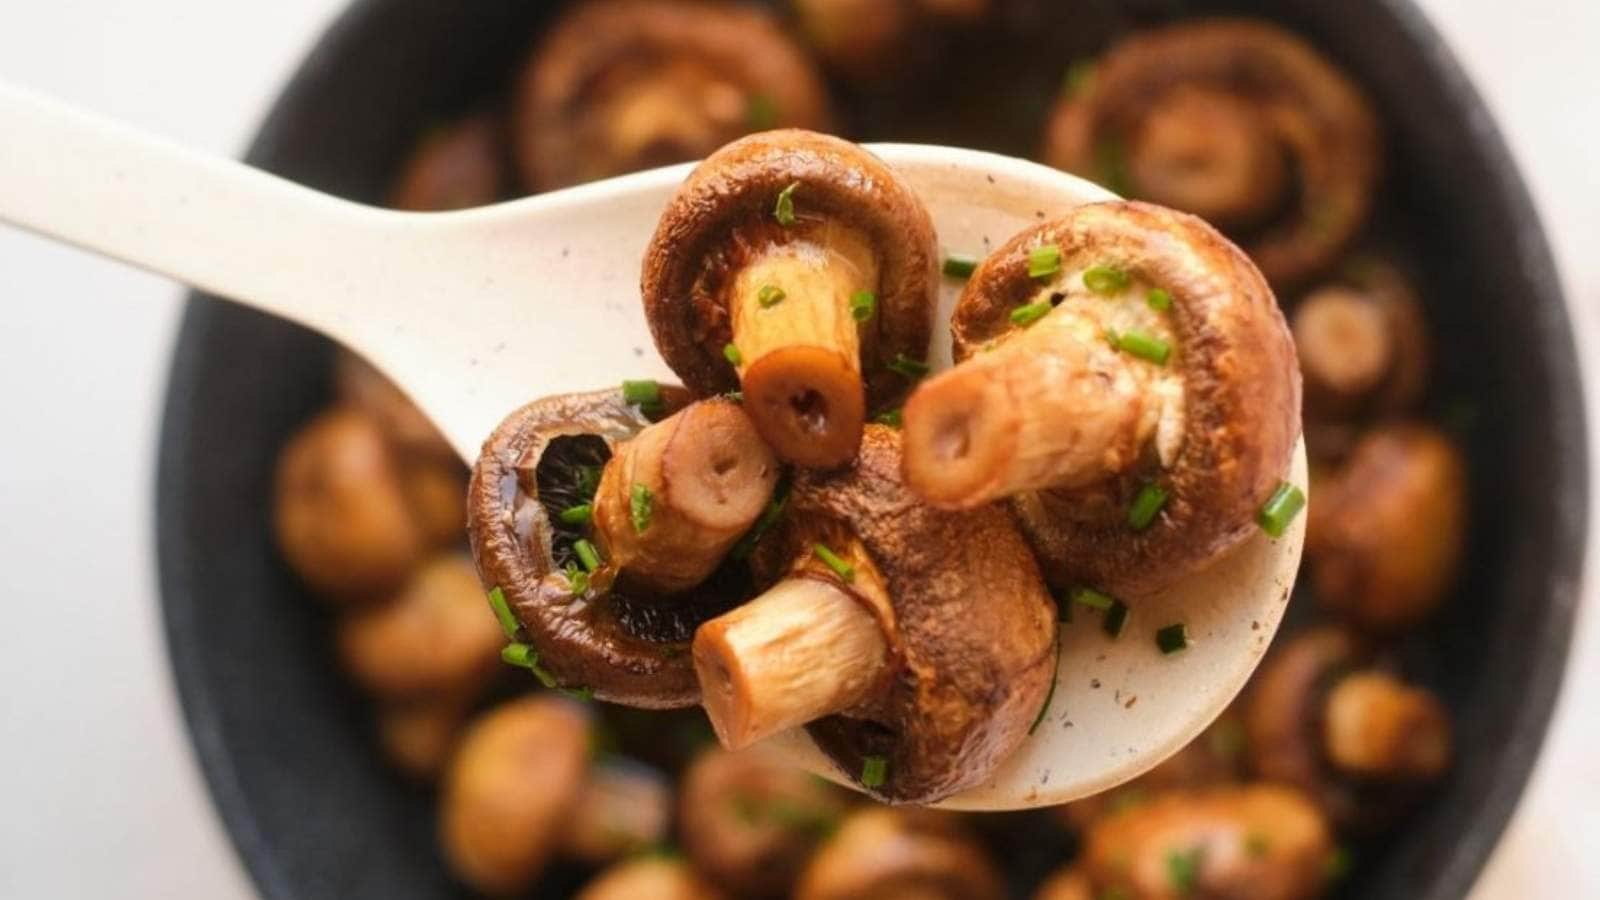 Balsamic Roasted Mushrooms recipe by Natural Deets.